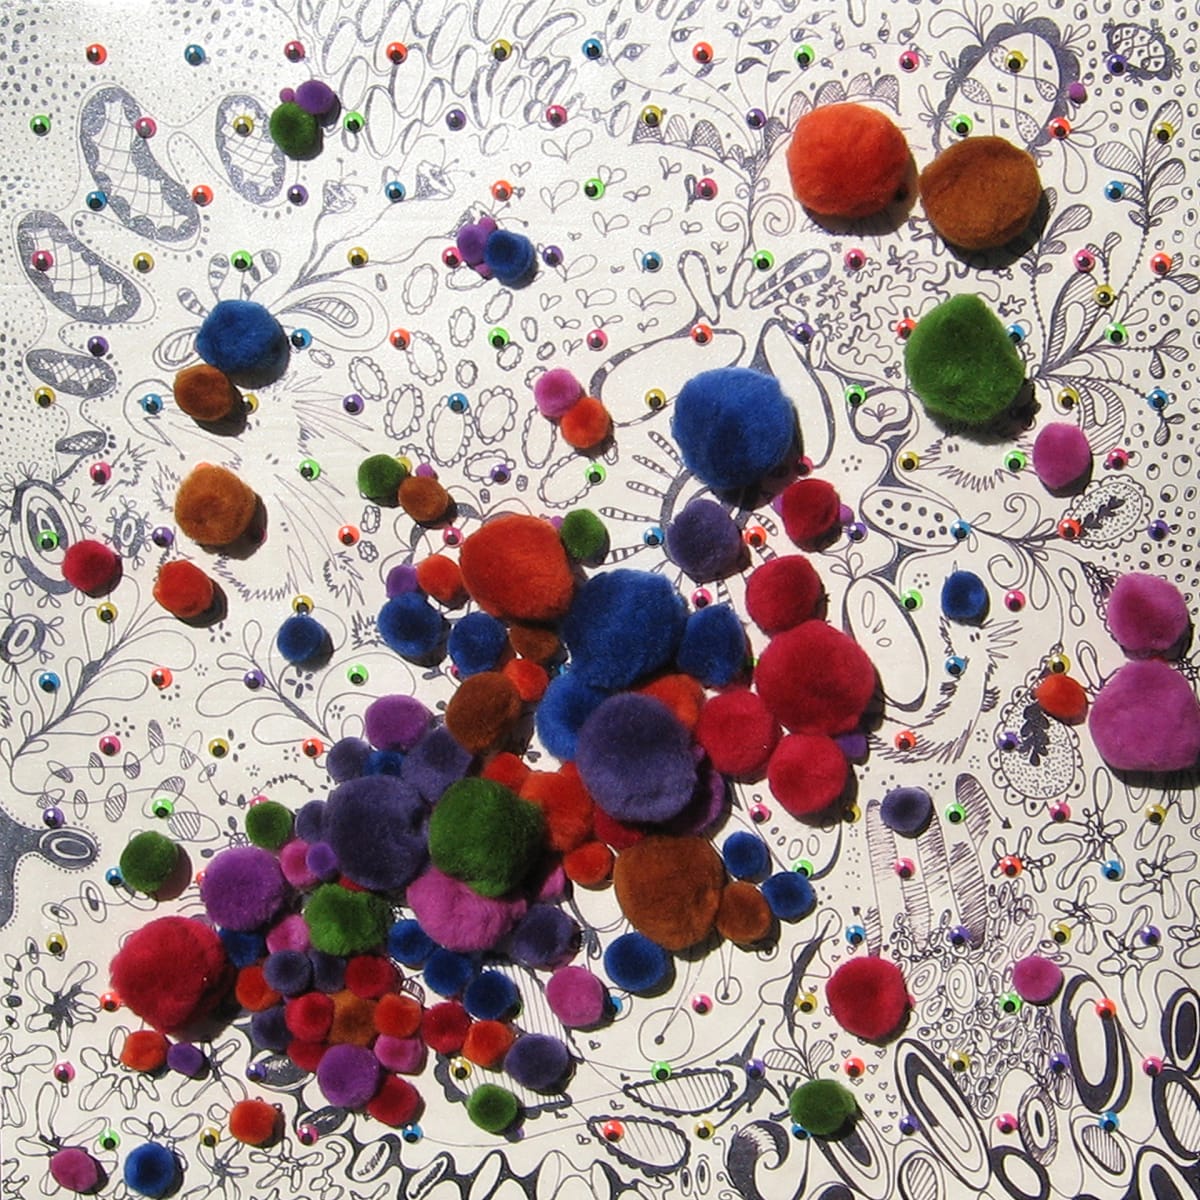 Puff Pop by Cynthia Mosser  Image: A mixed media painting incorporating layers of drawing, tiny eyeballs and multicolored puffs. The white of the background has a slight iridescent sheen.